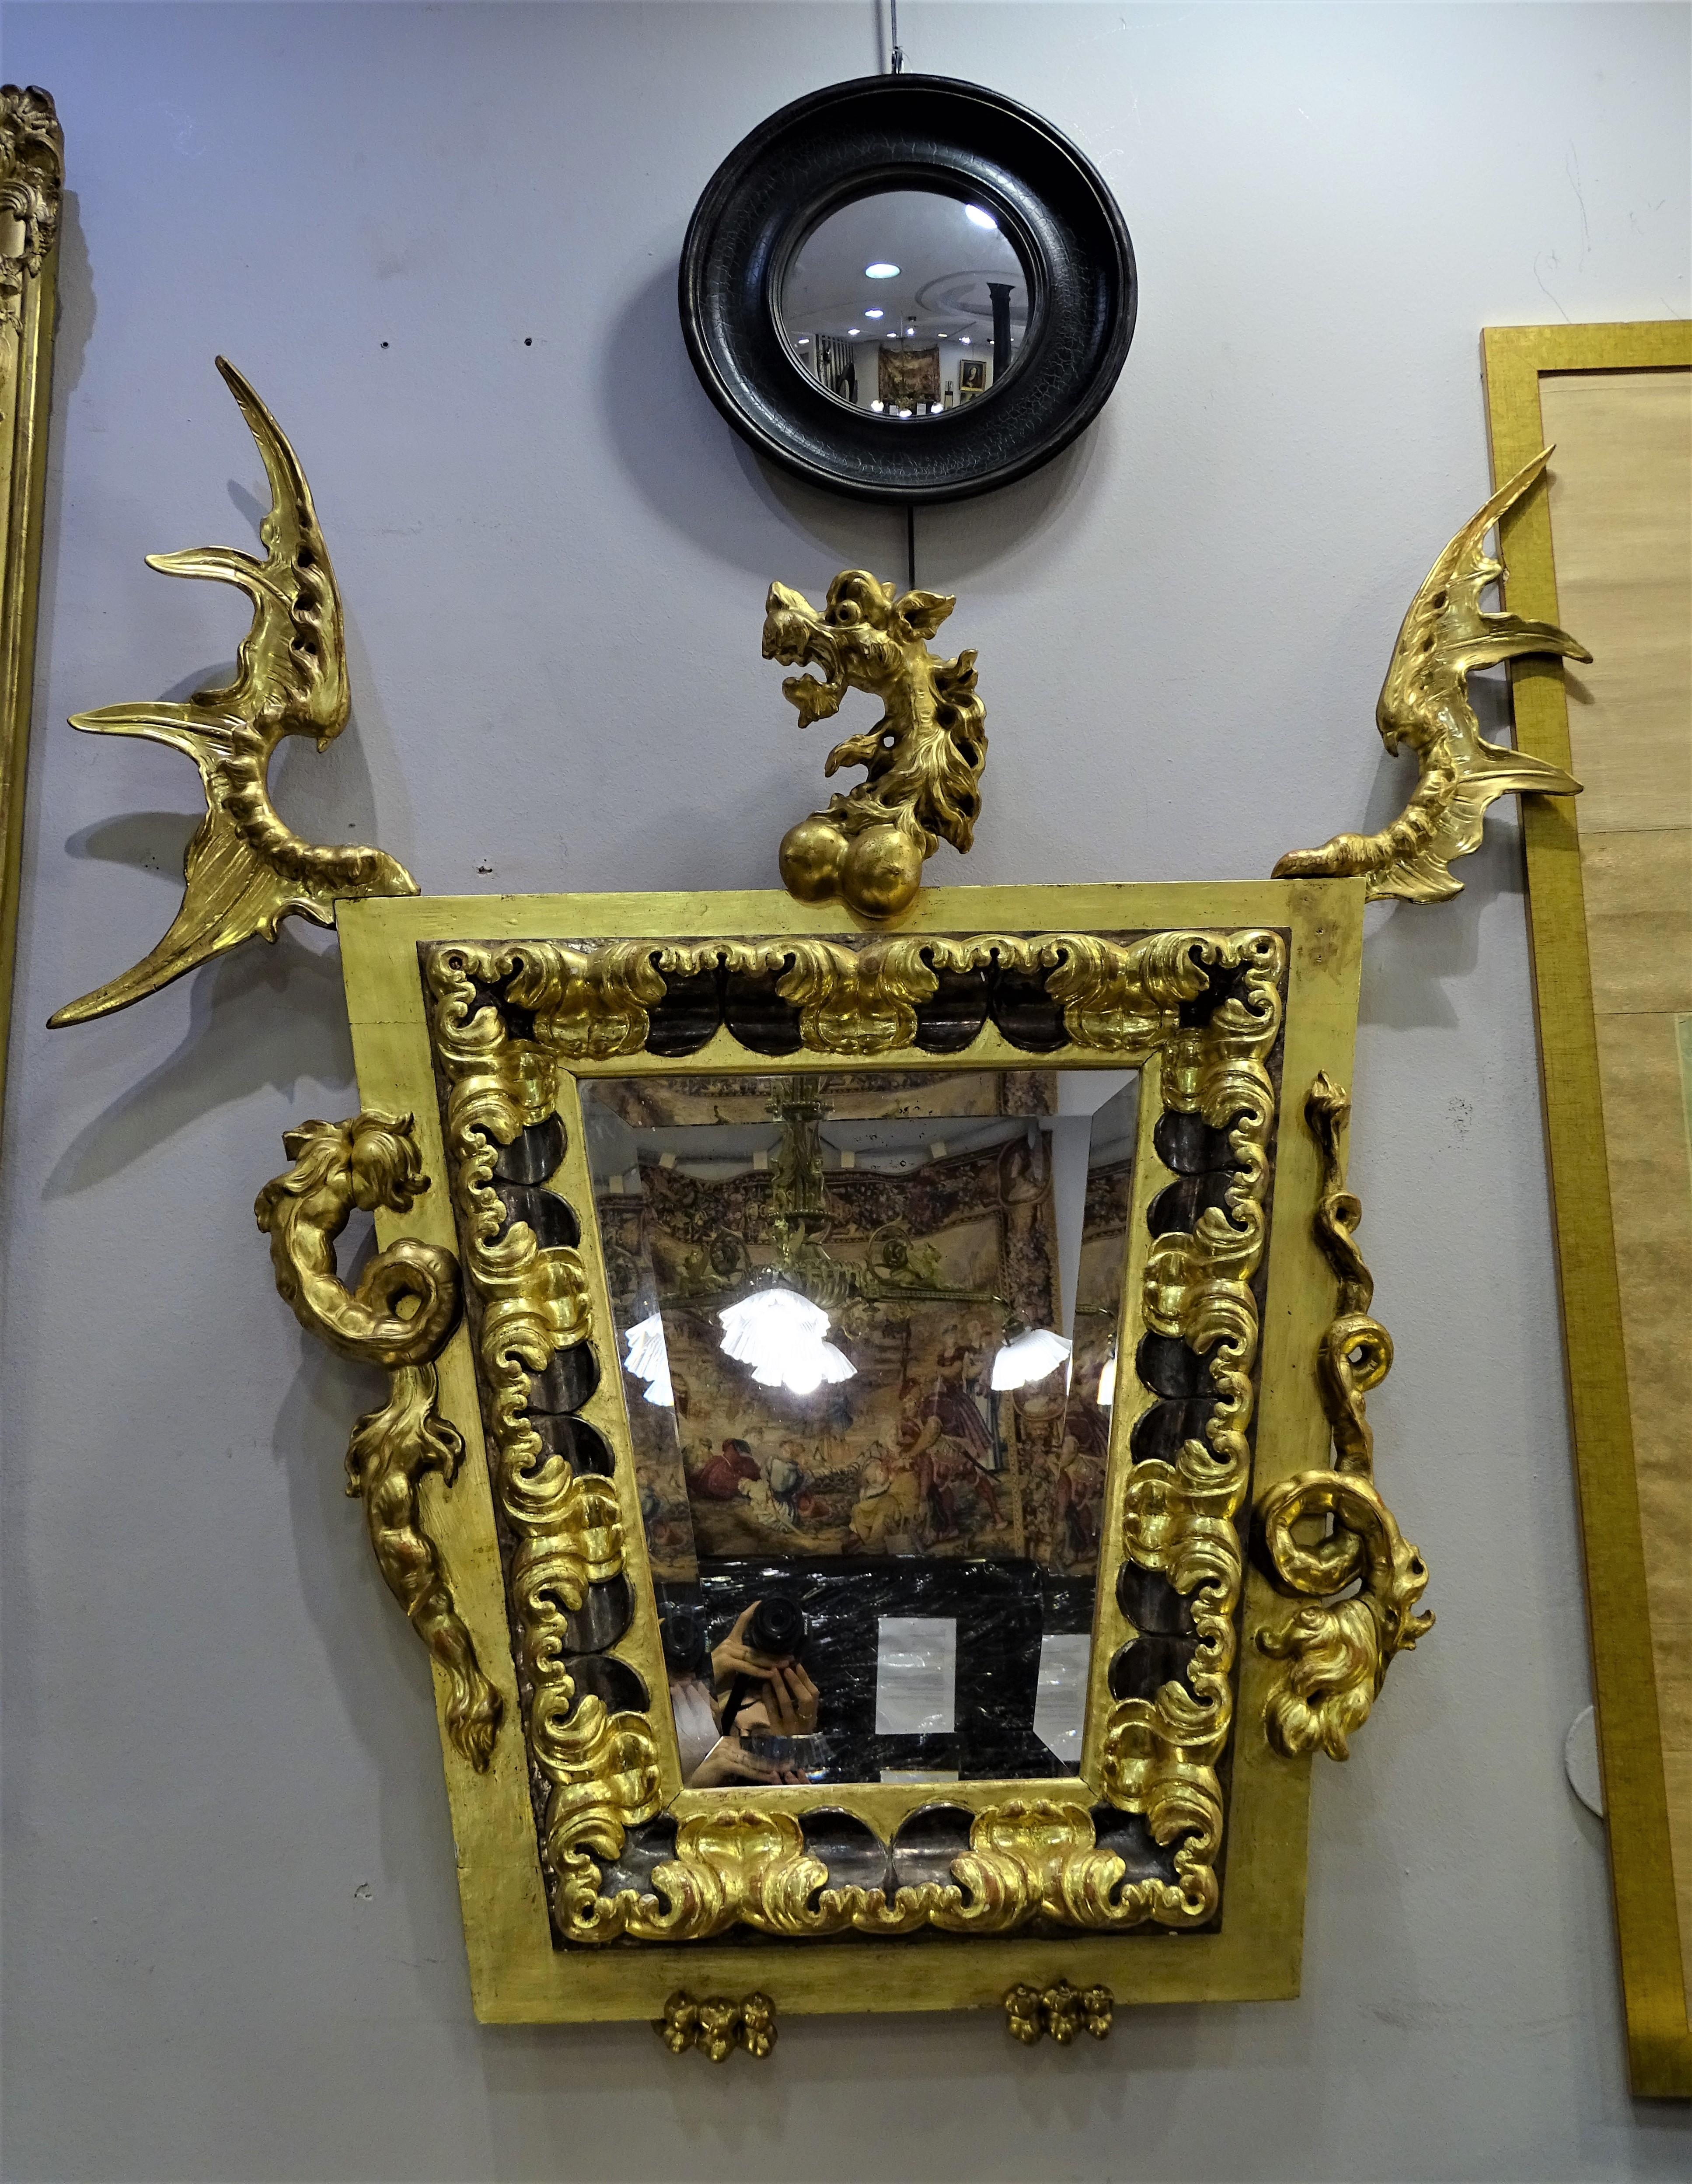 Outstanding mirror in the shape of an anthropomorphic dragon that follows the lines of the unmistakable aesthetics of the designer Gabriel Viardot (1830-1906). It is a piece with a unique and original character. Totally unique. Japanese style, the